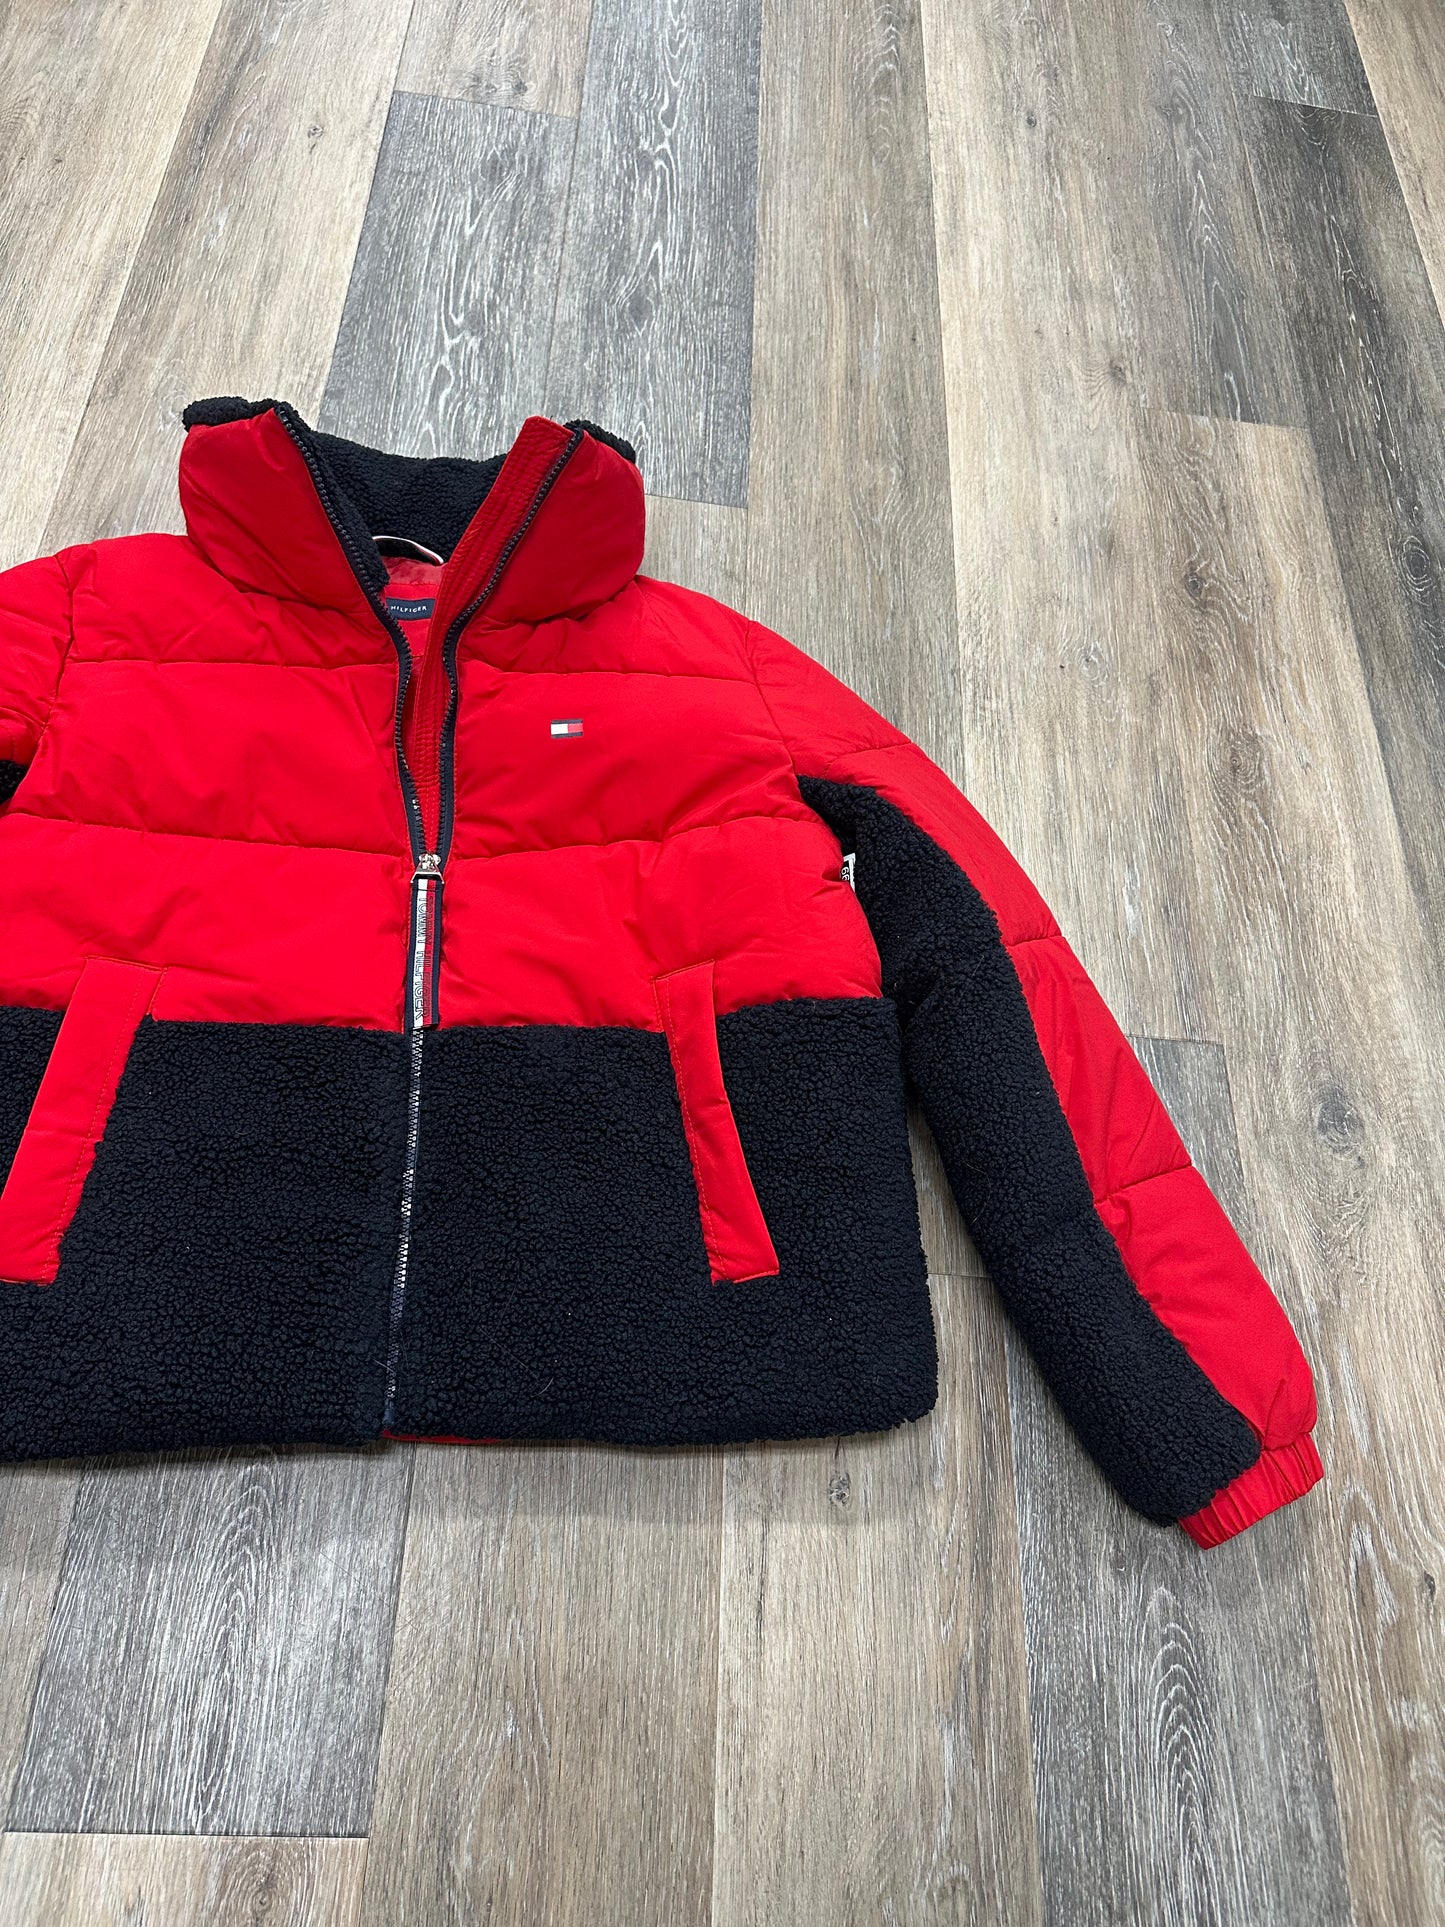 Coat Puffer & Quilted By Tommy Hilfiger  Size: S